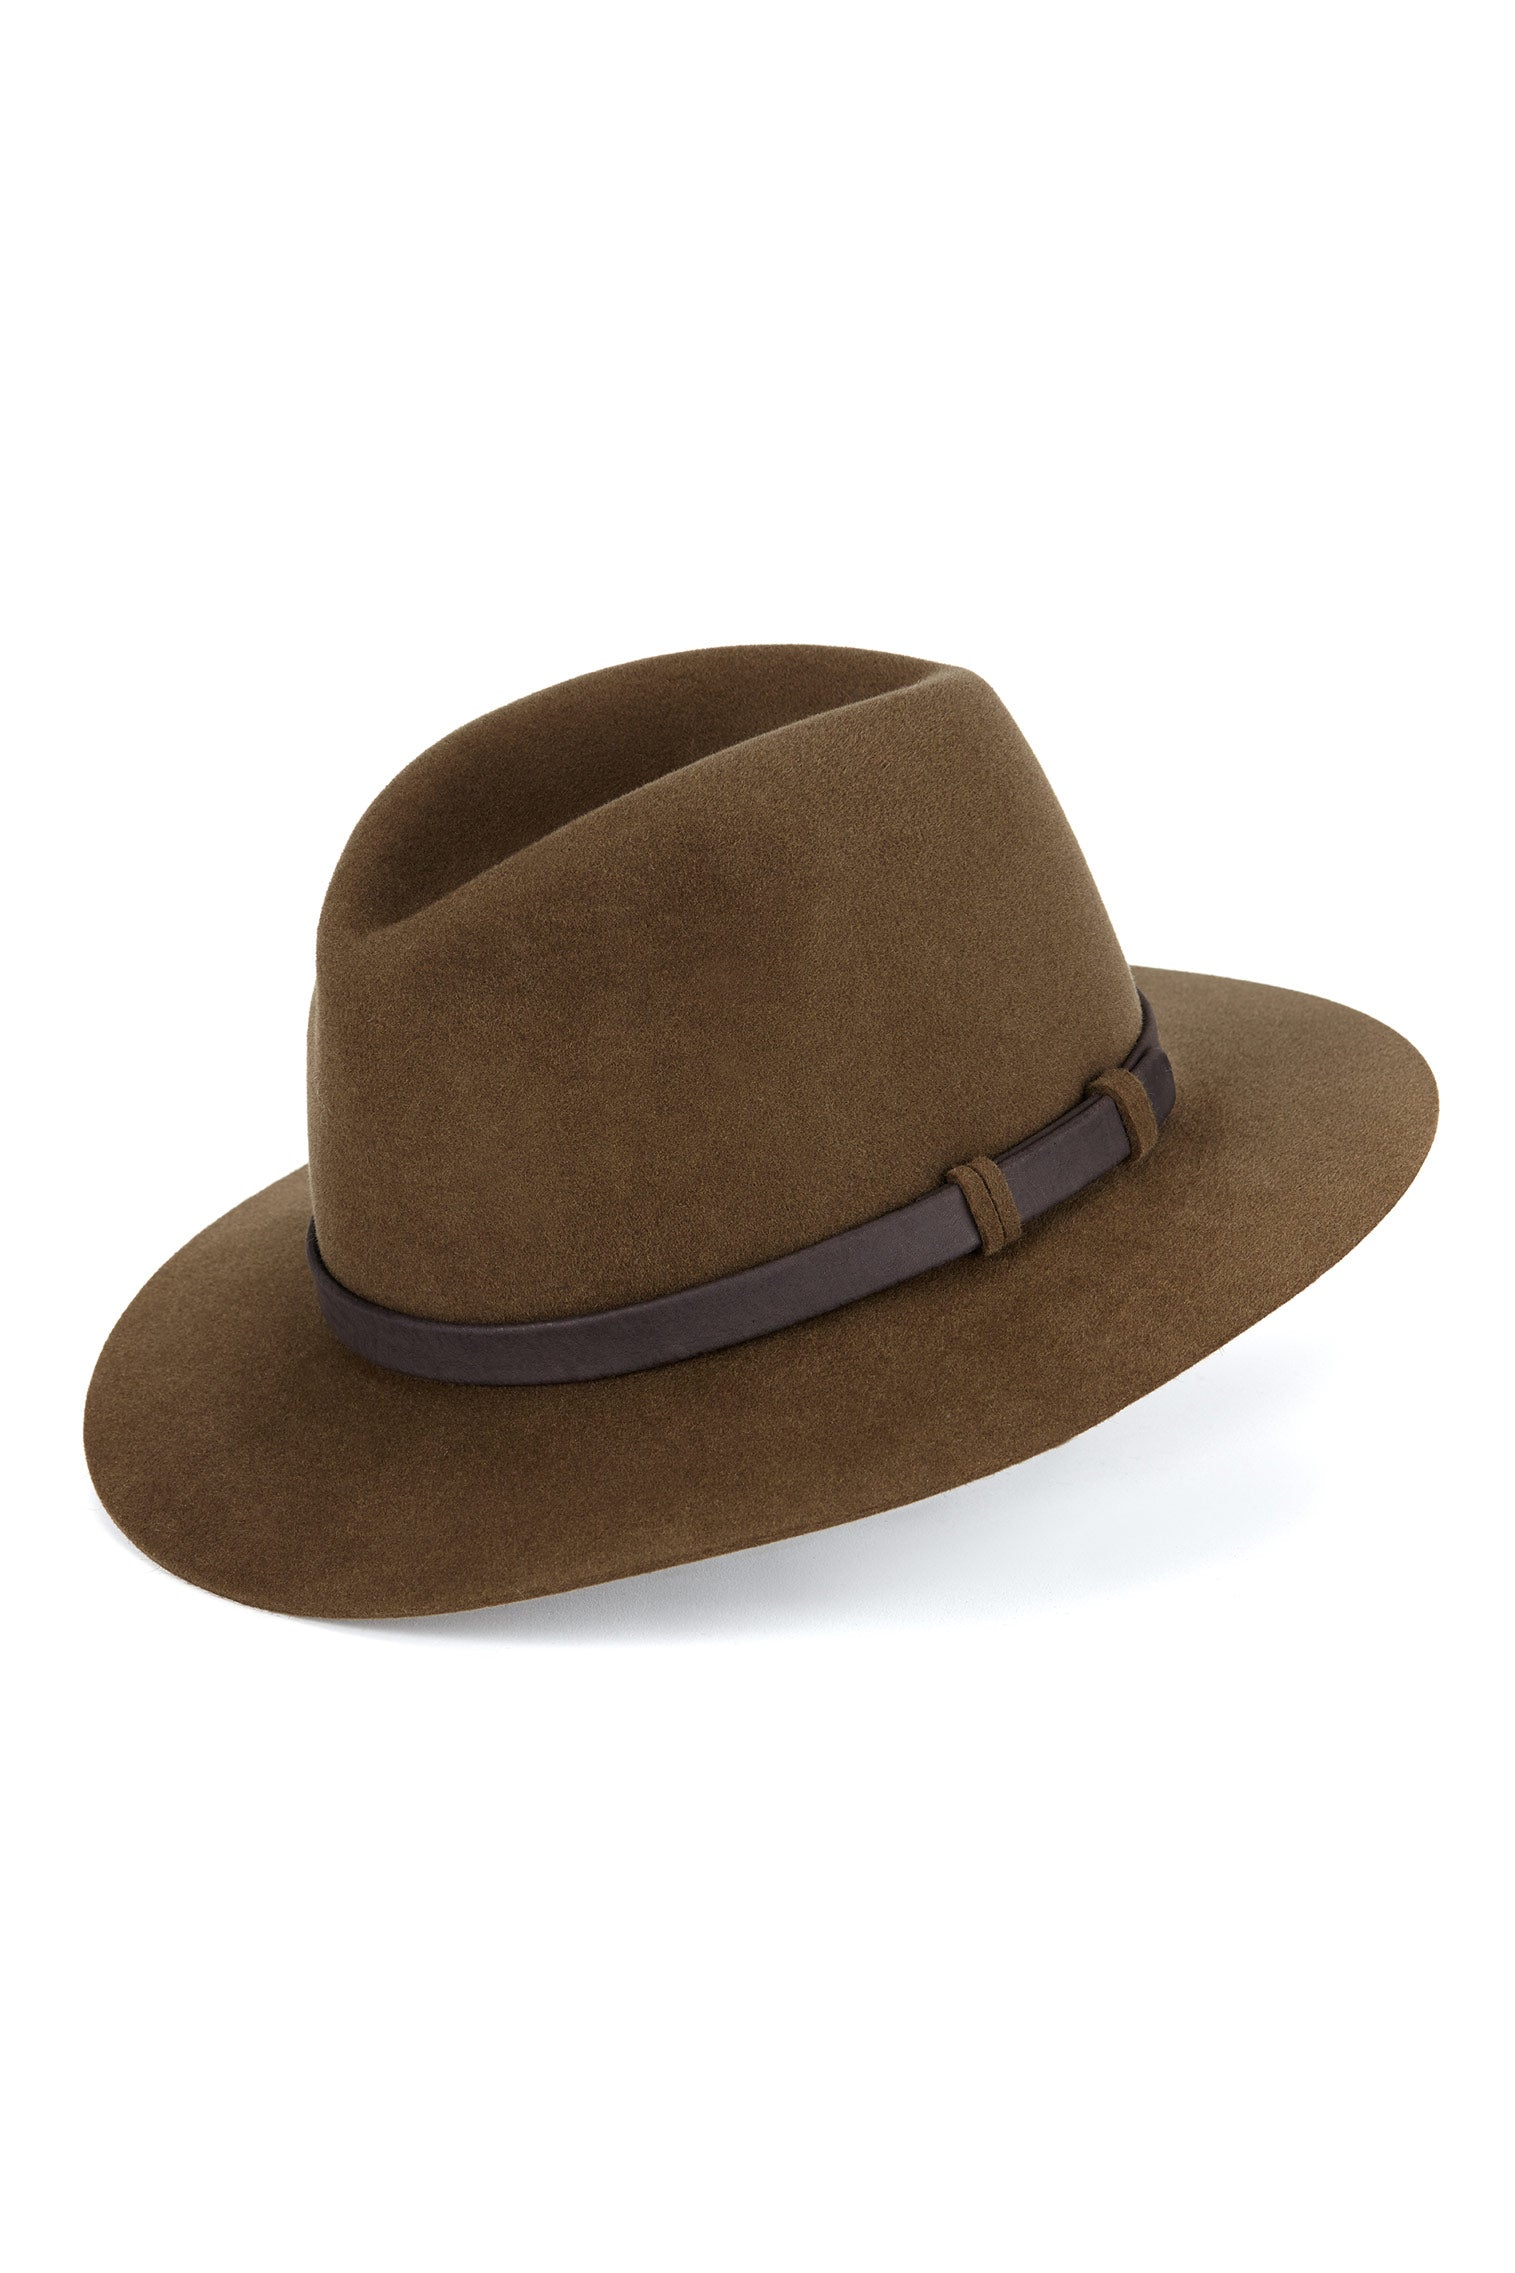 Chepstow Trilby - Products - Lock & Co. Hatters London UK